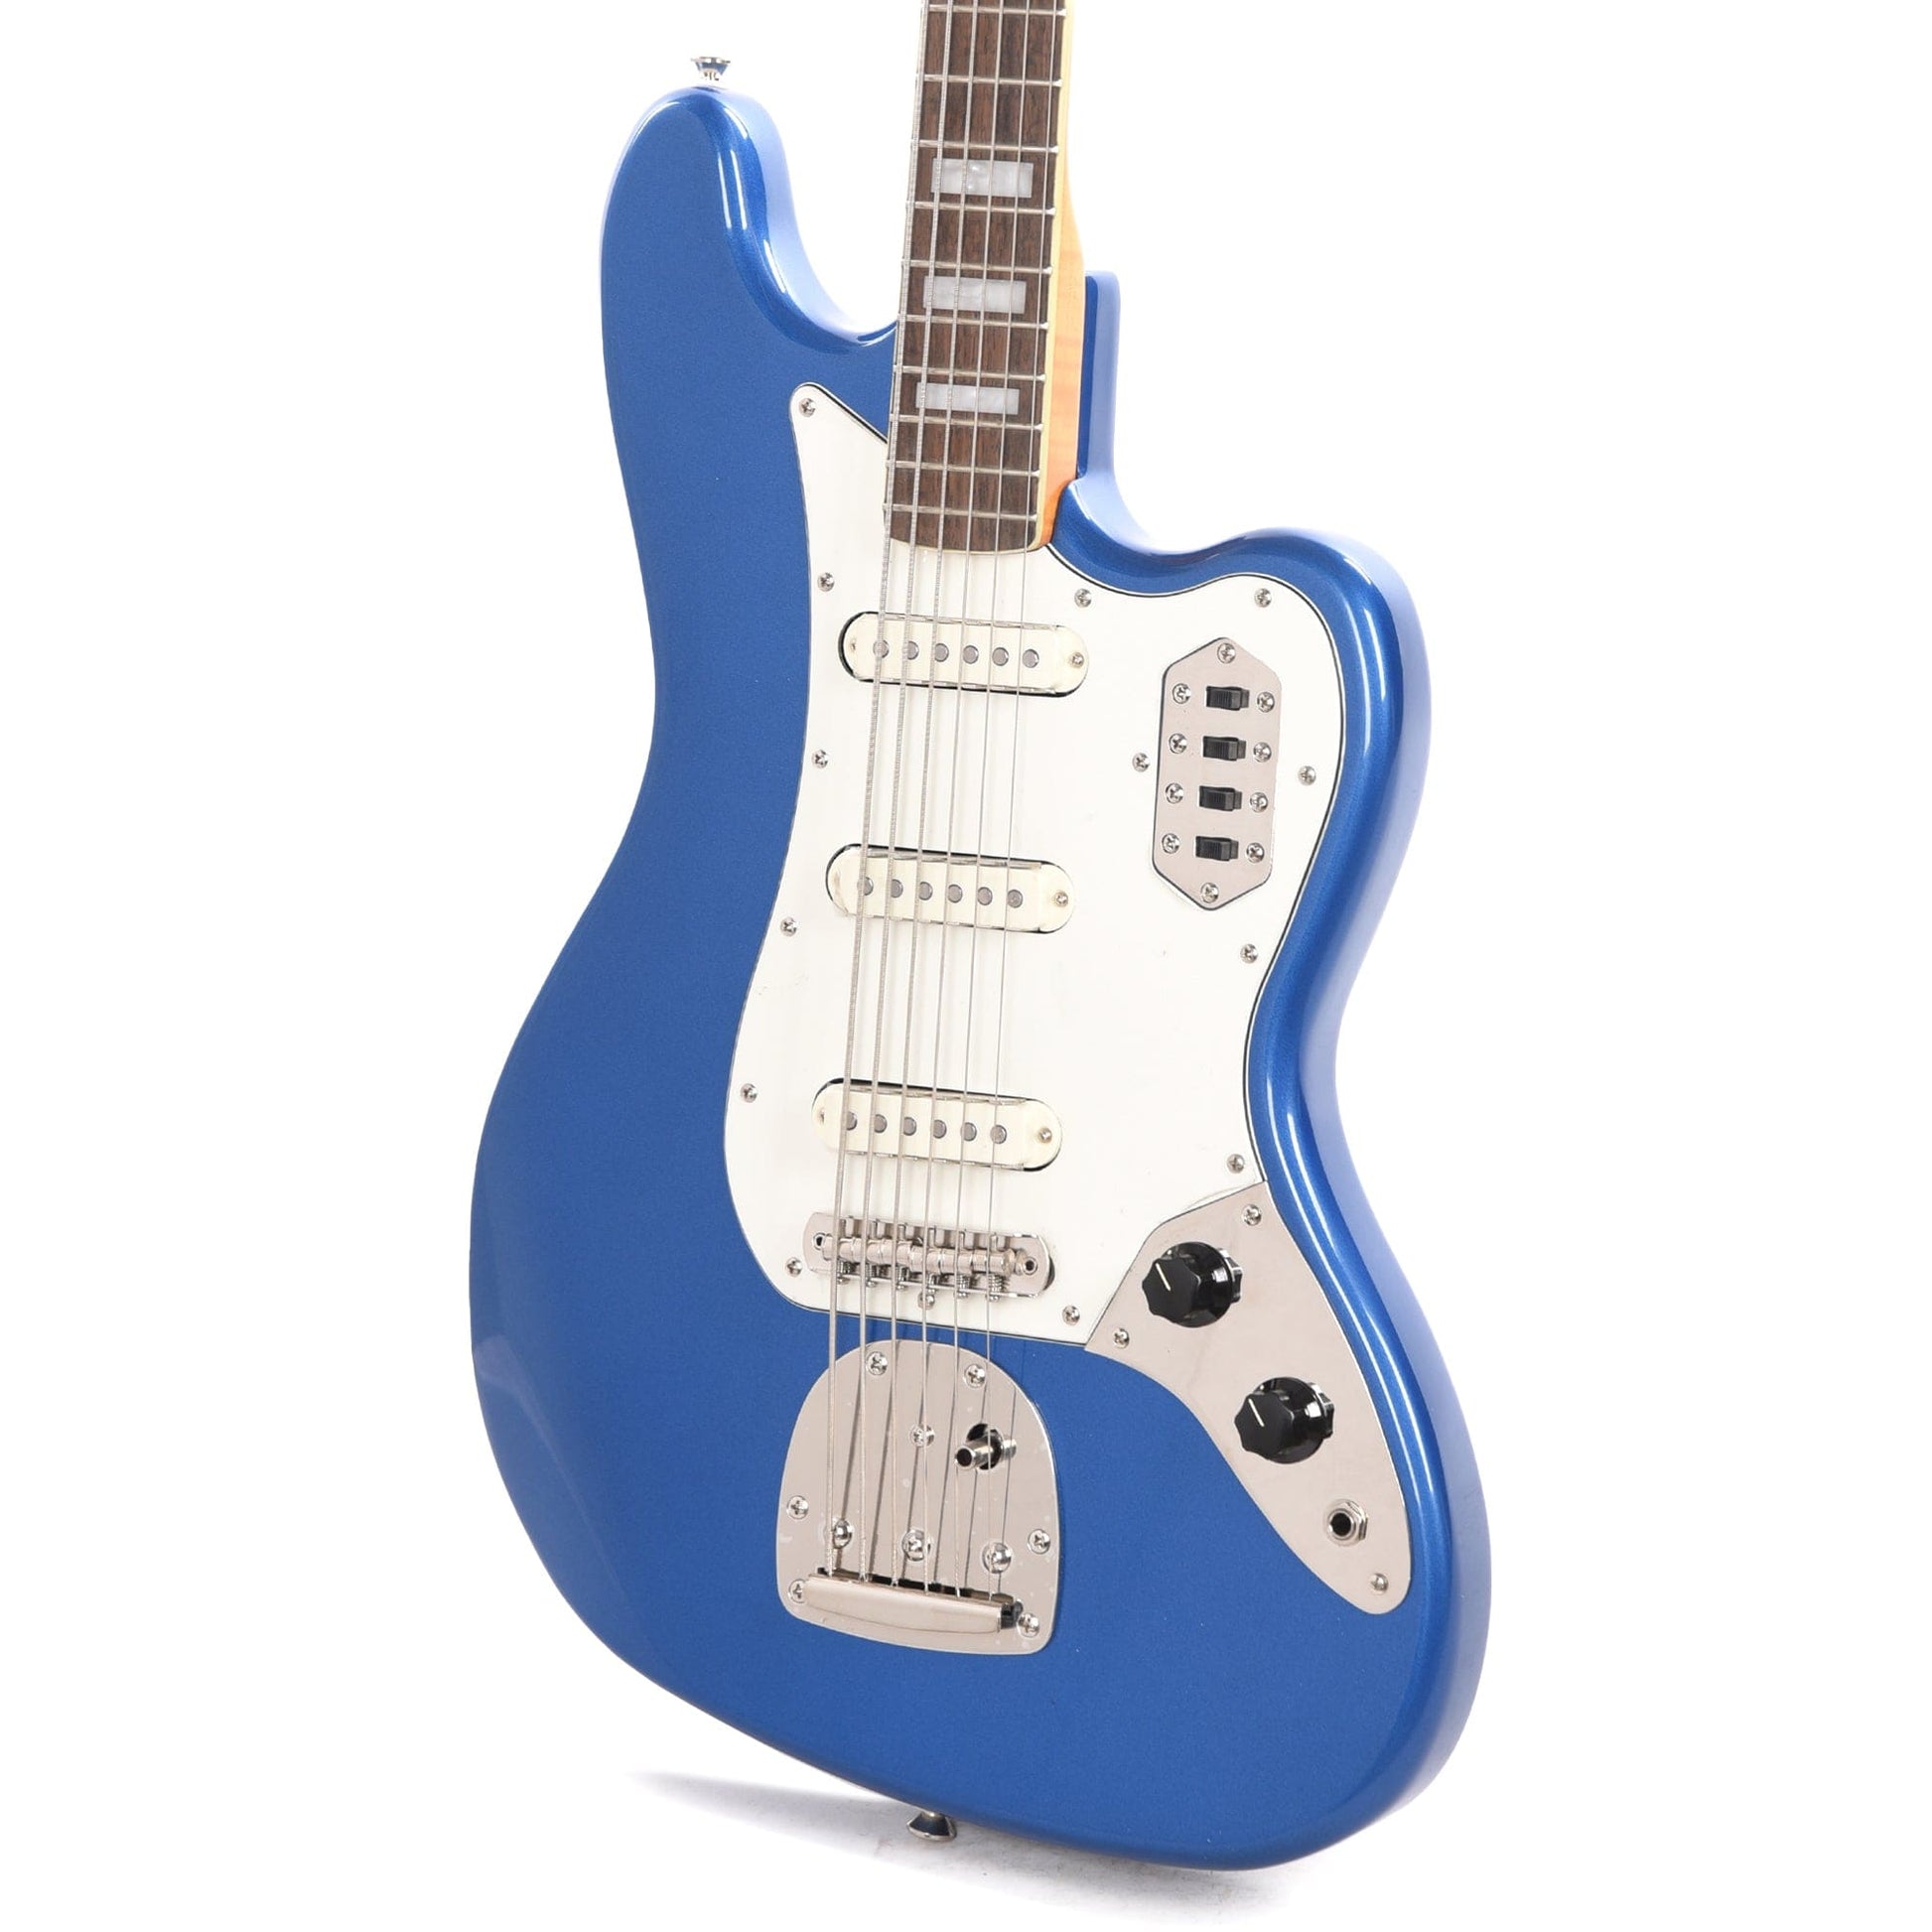 Squier Classic Vibe Bass VI Lake Placid Blue w/Matching Headcap & 3-Ply Parchment Pickguard Bass Guitars / 5-String or More